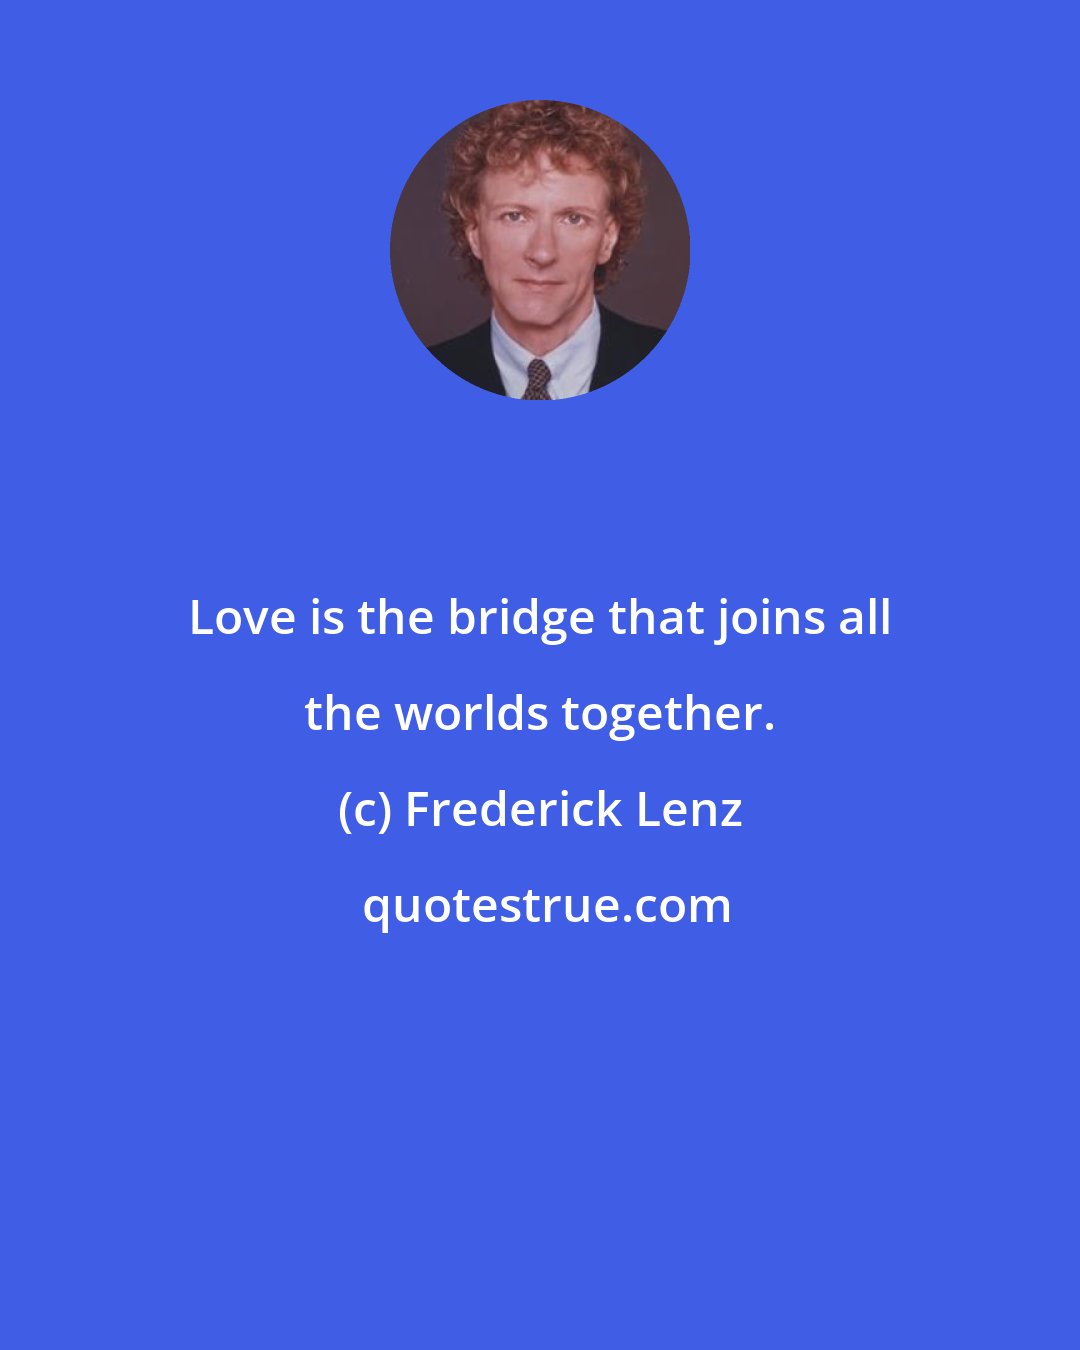 Frederick Lenz: Love is the bridge that joins all the worlds together.